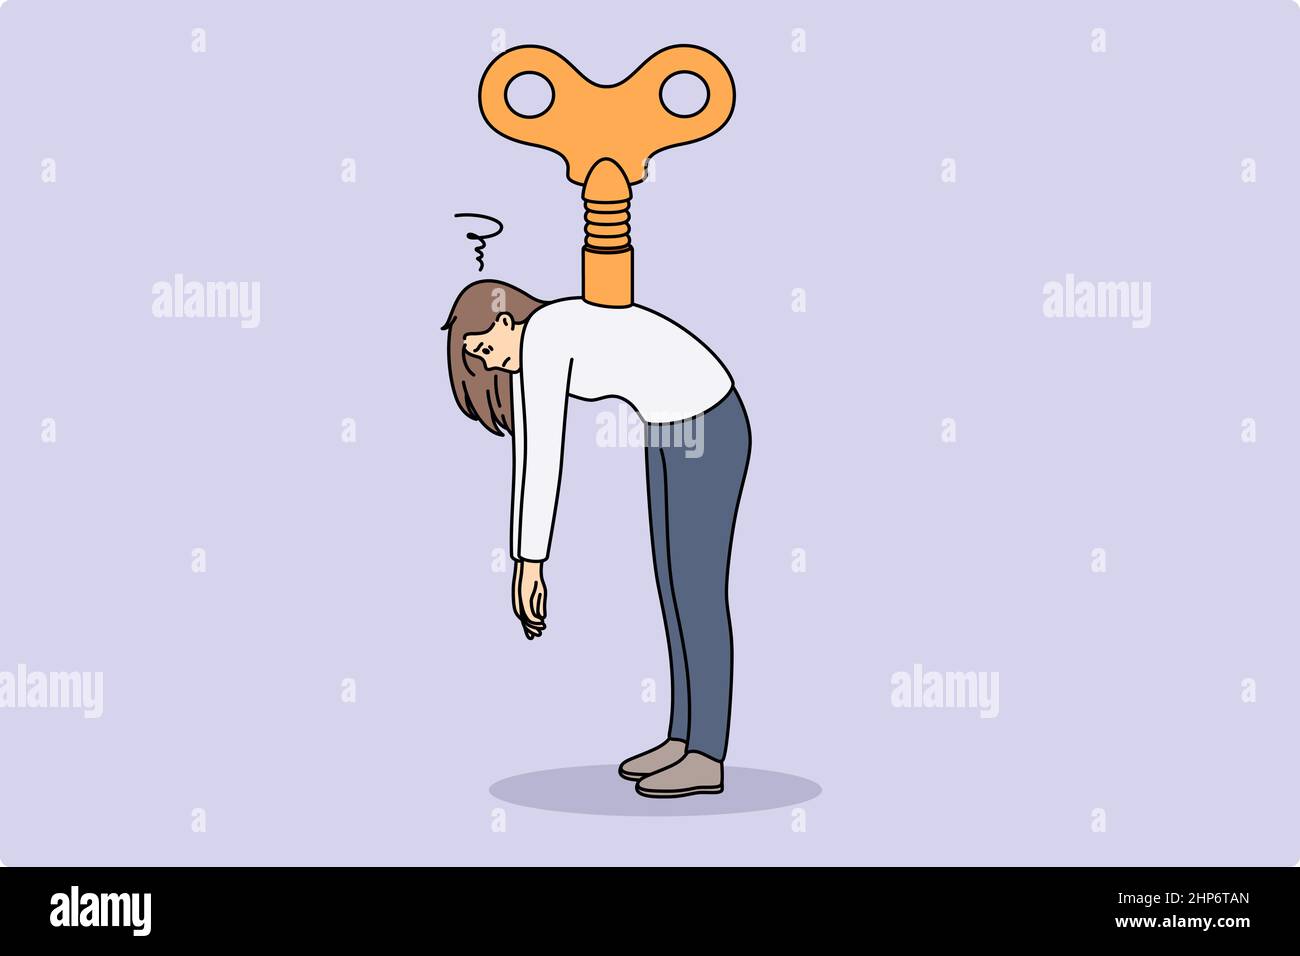 Control manipulation and marionette concept. Stock Vector